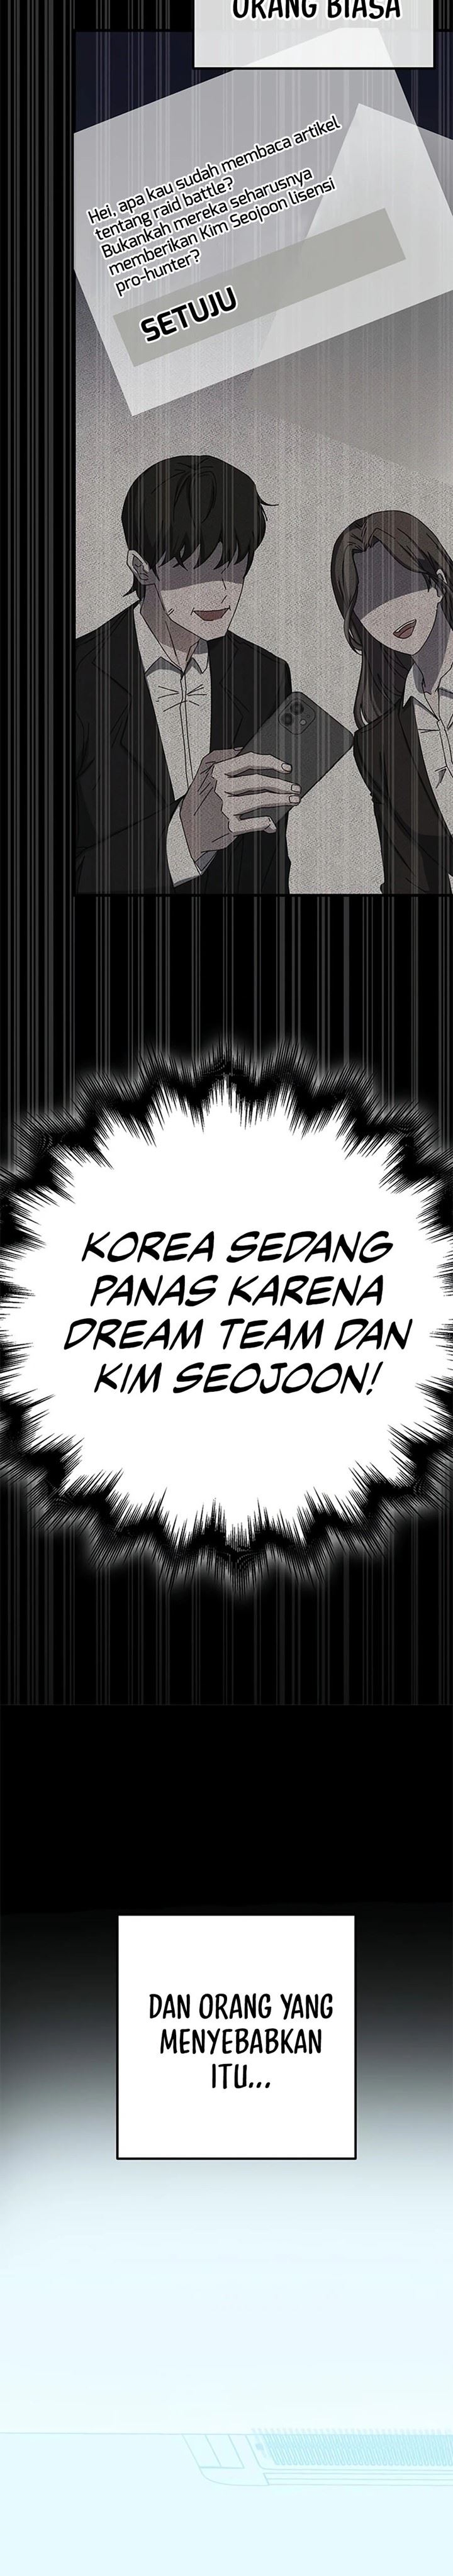 Transcension Academy Chapter 61